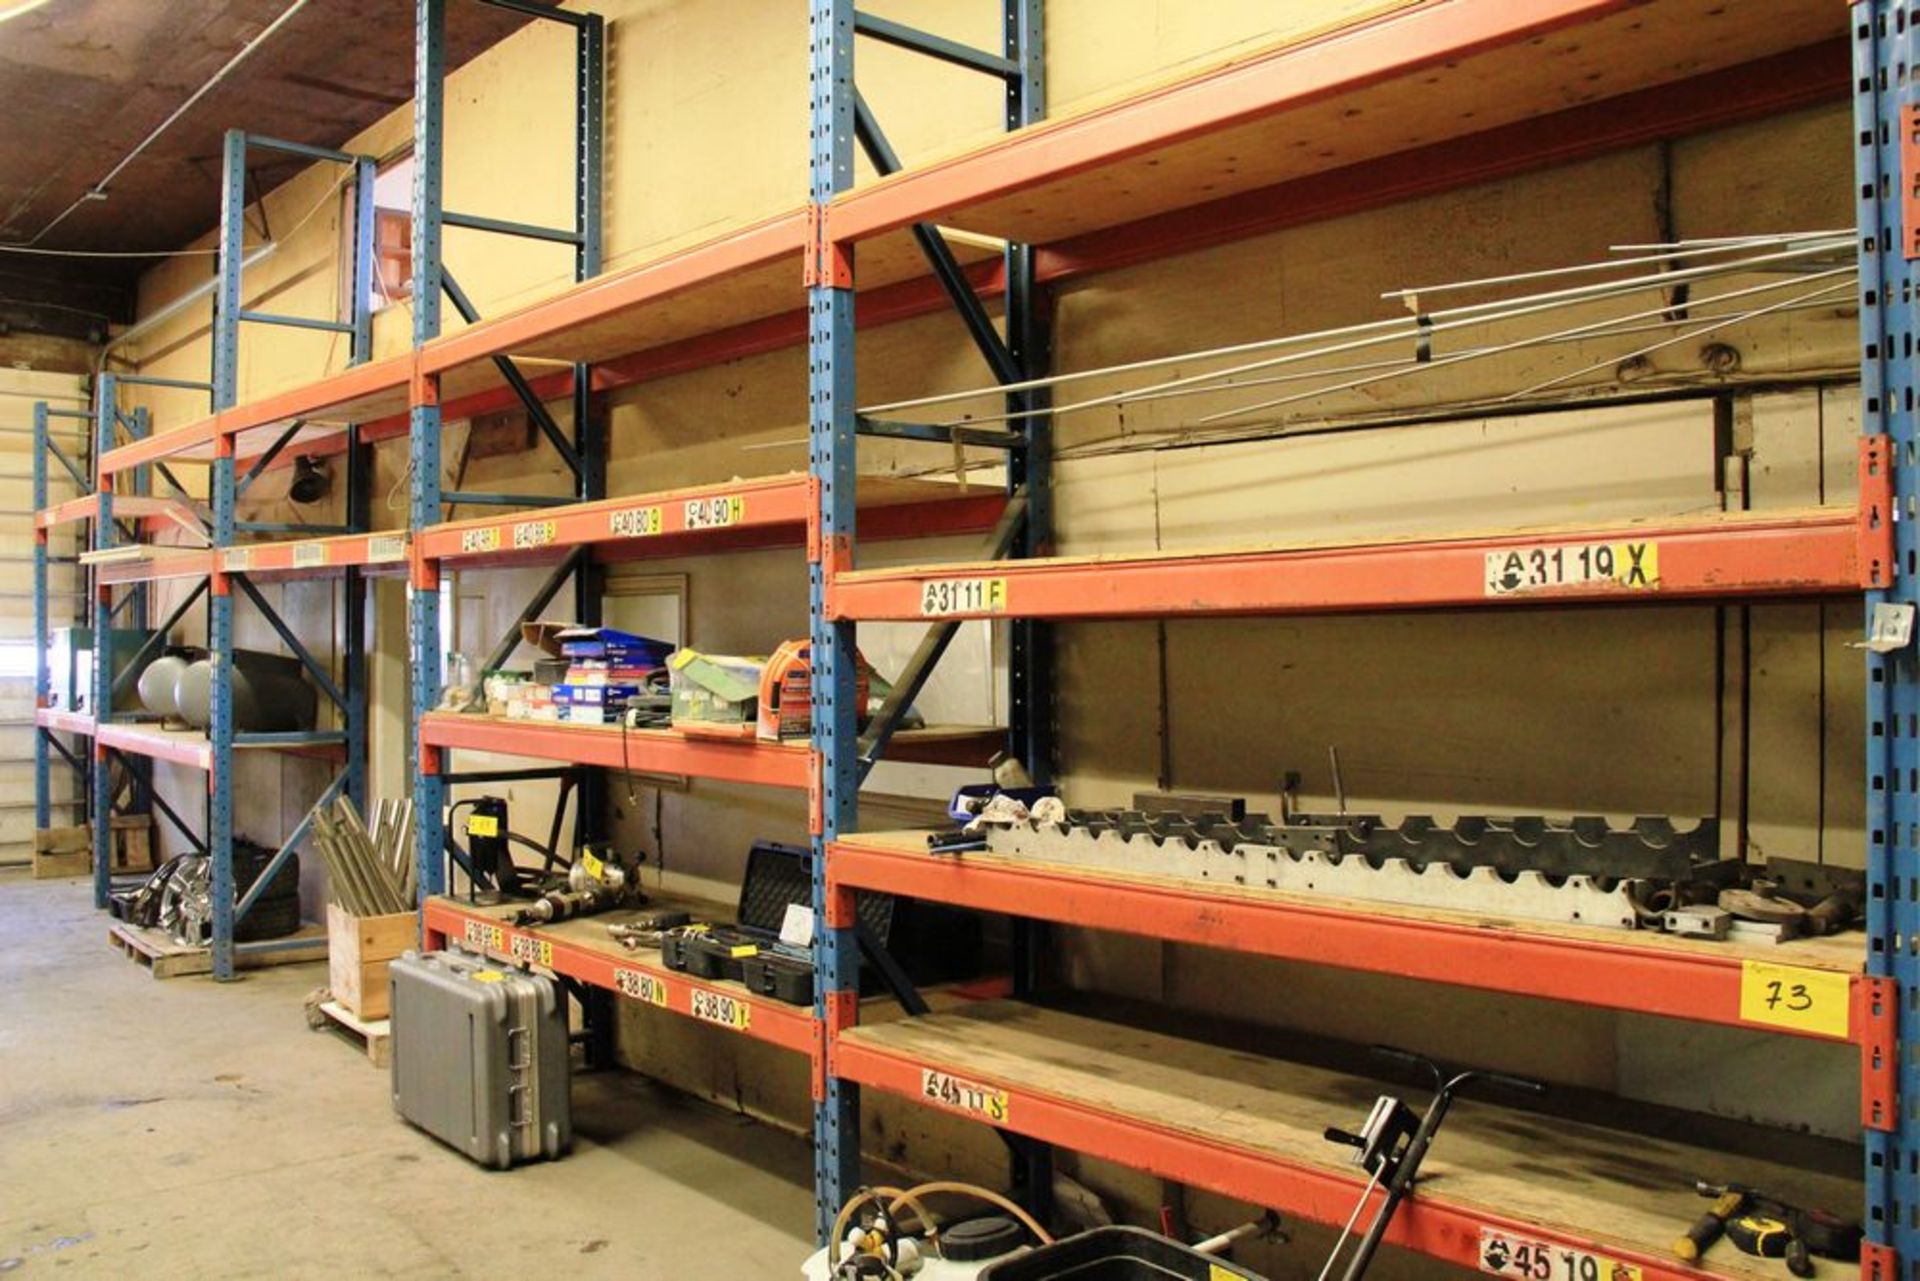 LOT, (6) SECTIONS OF PALLET RACKING CONSISTING OF: 30" X (5) 14 '- (2) 10' UPRIGHTS, (32) 4" X 8'